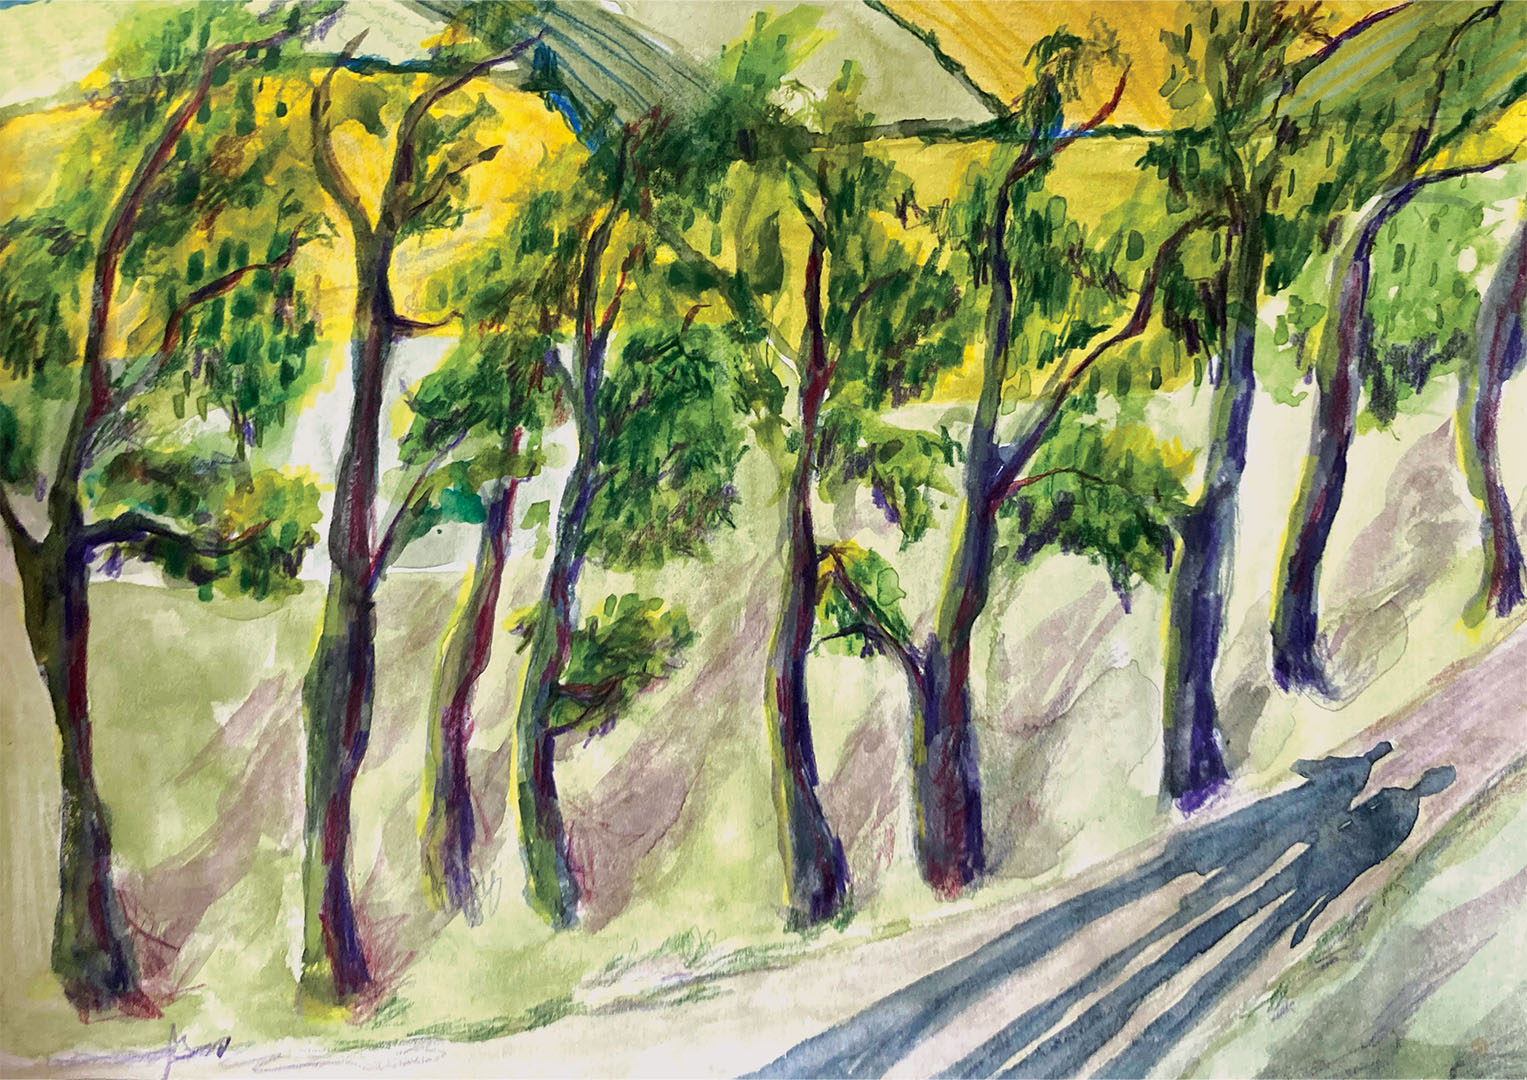 Illustration of row of trees